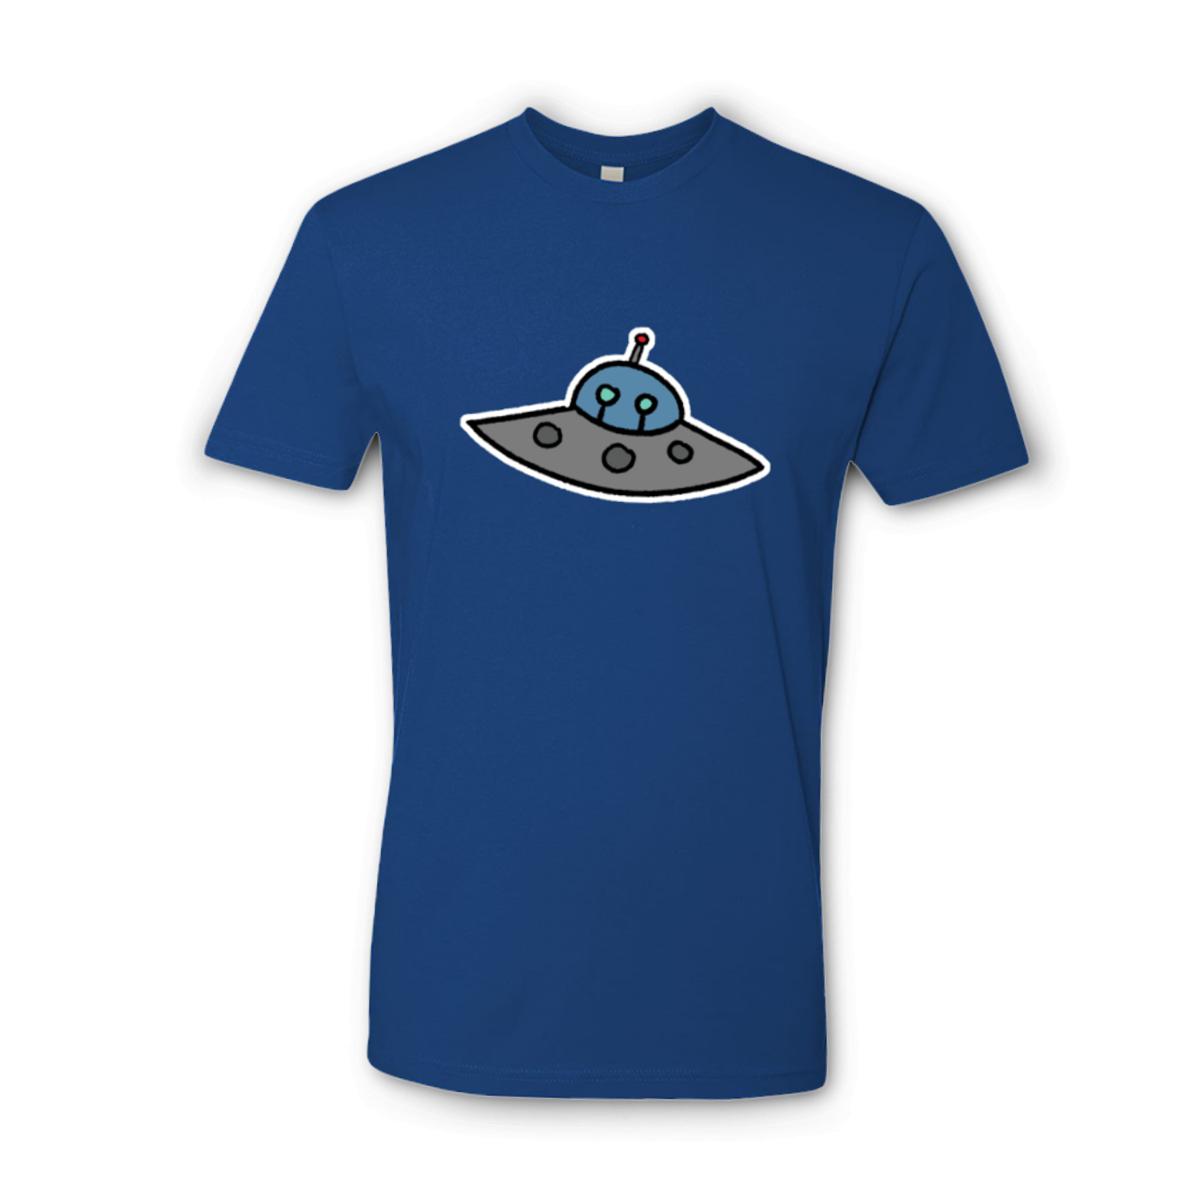 Flying Saucer Unisex Tee Small royal-blue